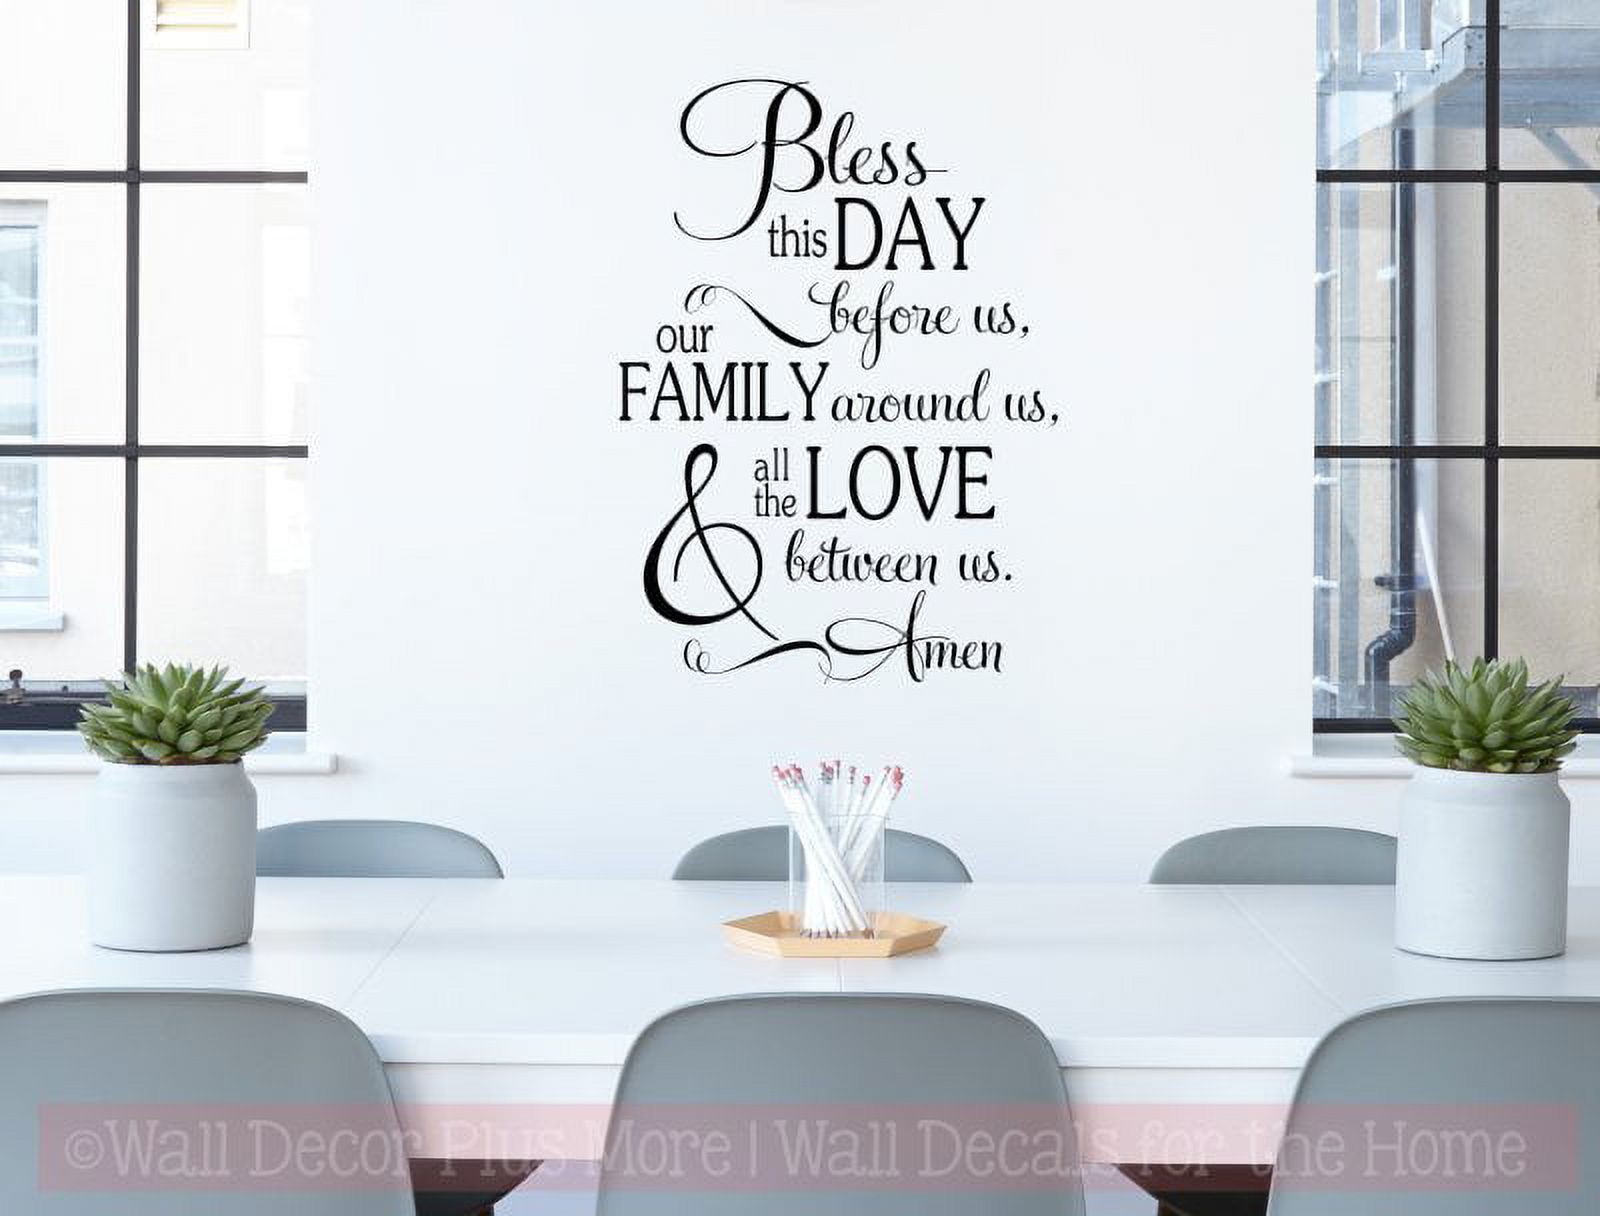 Kitchen Wall Art Decals Bless This Day Amen Love Vinyl Letter Stickers  23x17-Inch Black 